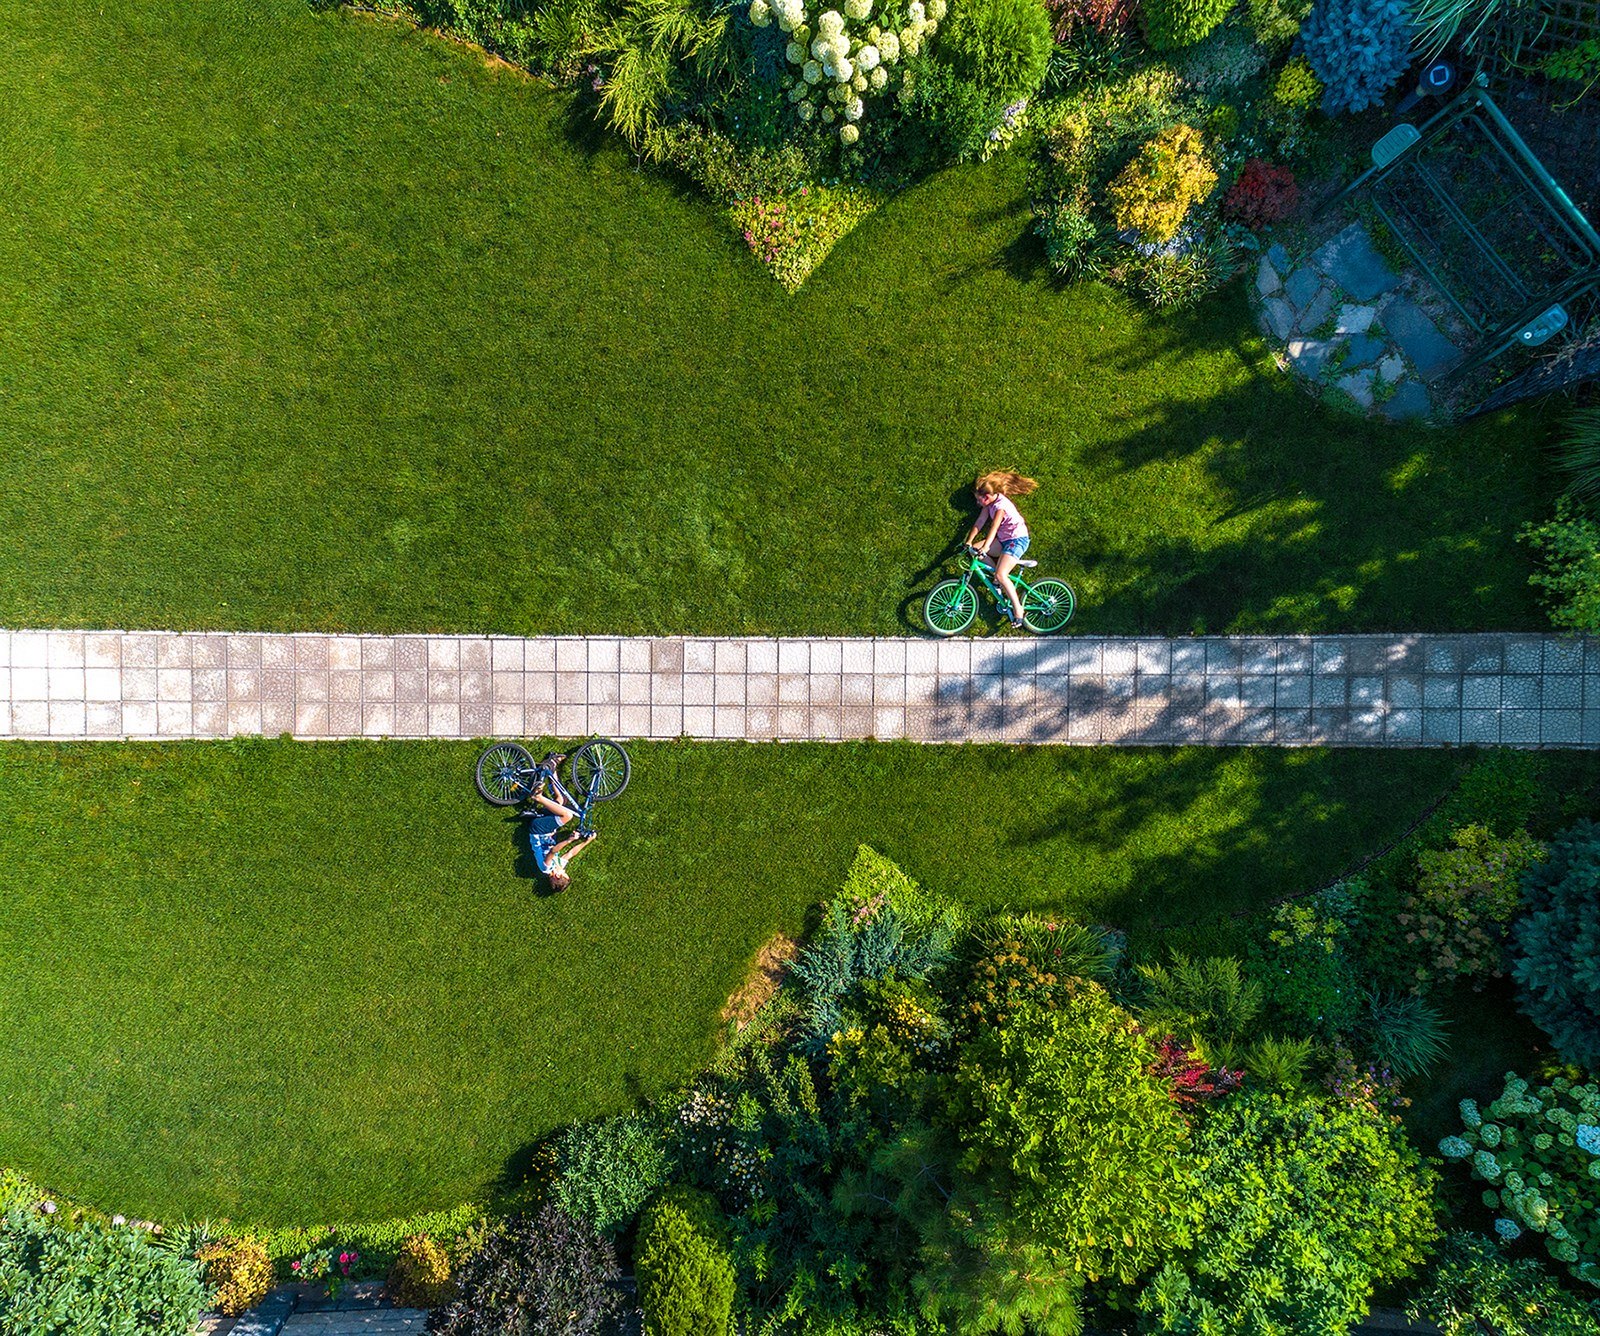 General 1600x1336 photography aerial view nature landscape children bicycle path humor trees grass garden tiles lawns shadow lying on side